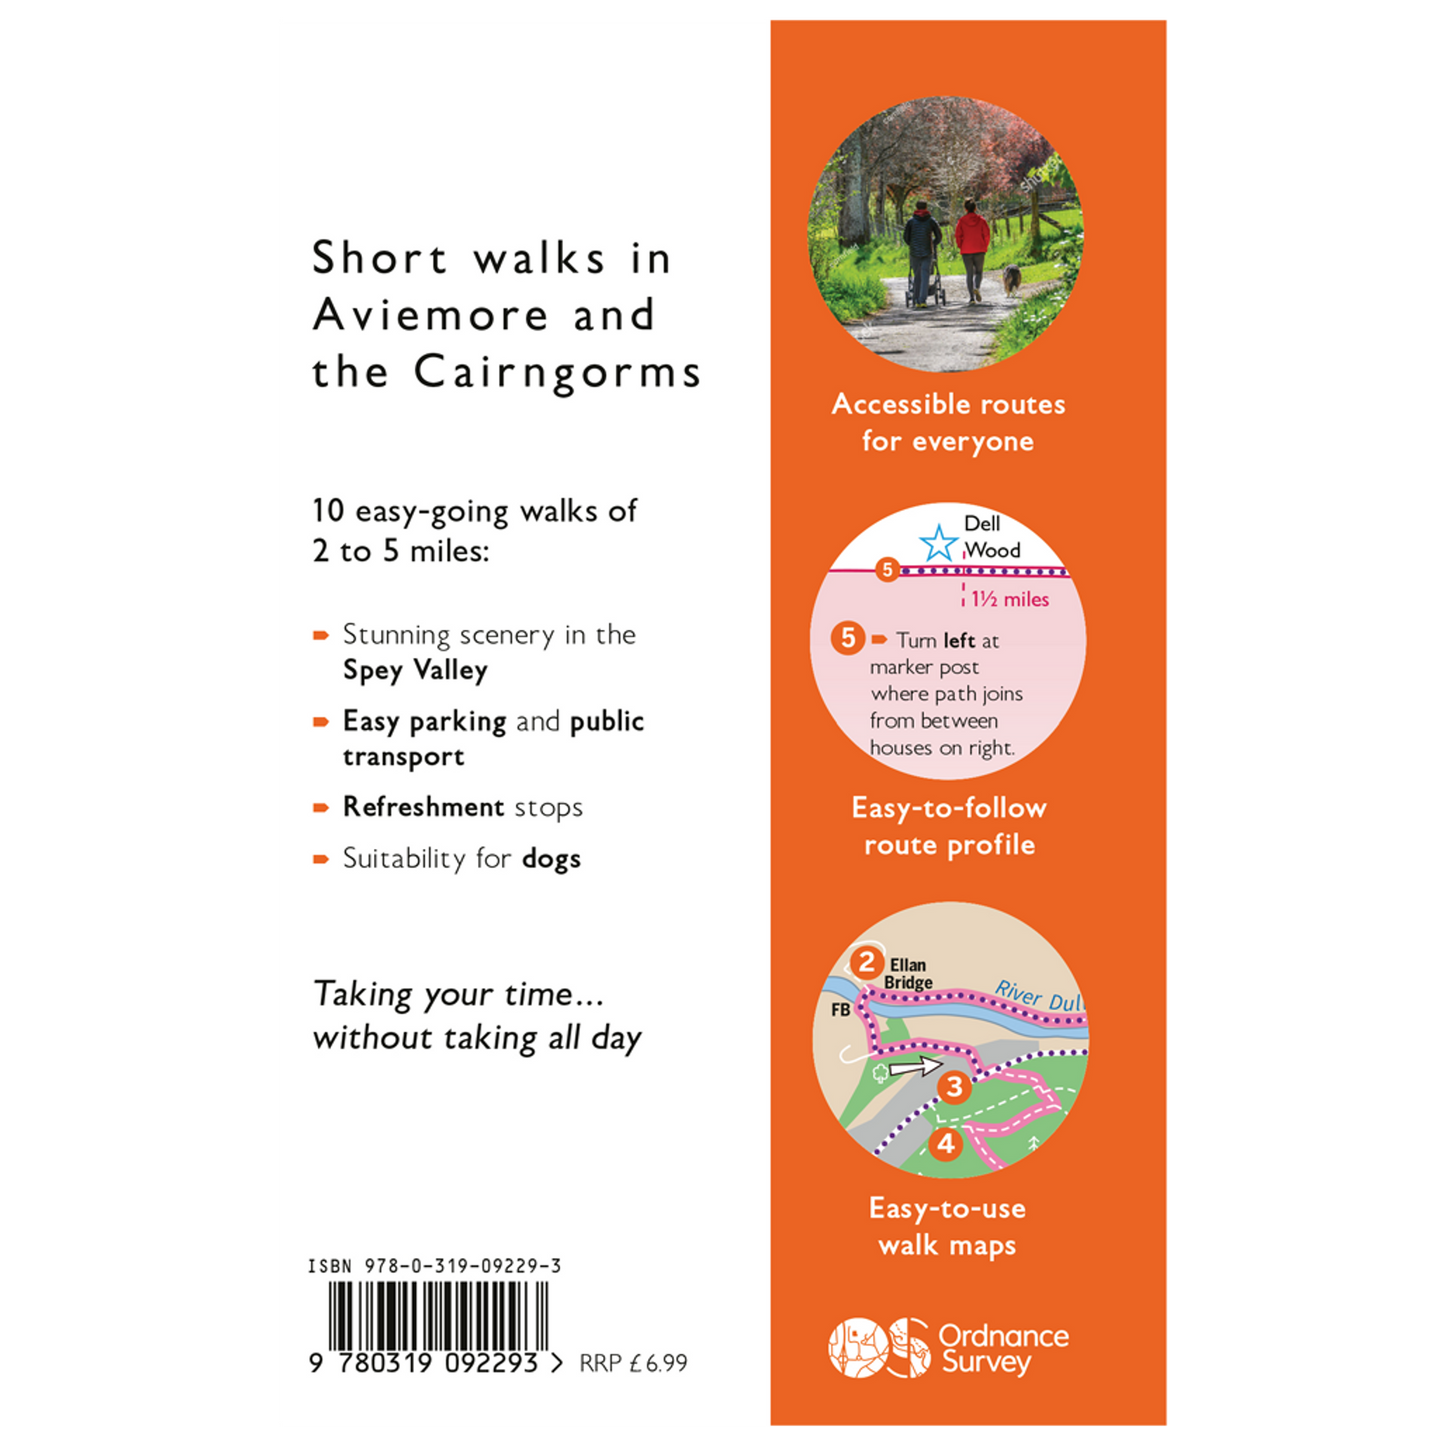 Ordnance Survey Short Walks Made Easy - Aviemore and the Cairngorms 